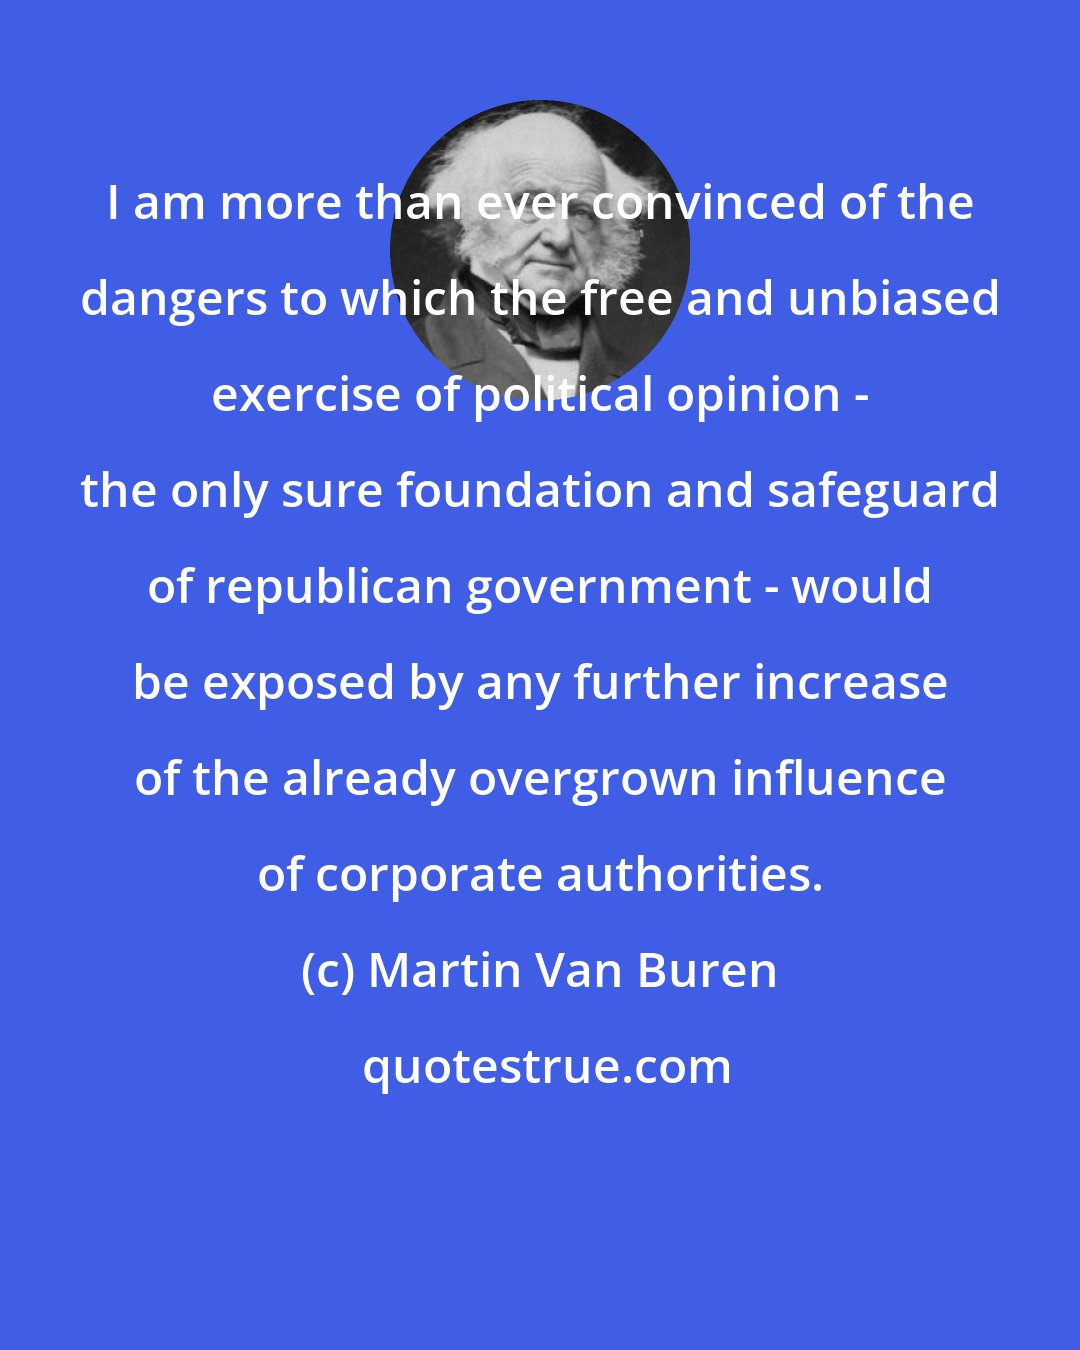 Martin Van Buren: I am more than ever convinced of the dangers to which the free and unbiased exercise of political opinion - the only sure foundation and safeguard of republican government - would be exposed by any further increase of the already overgrown influence of corporate authorities.